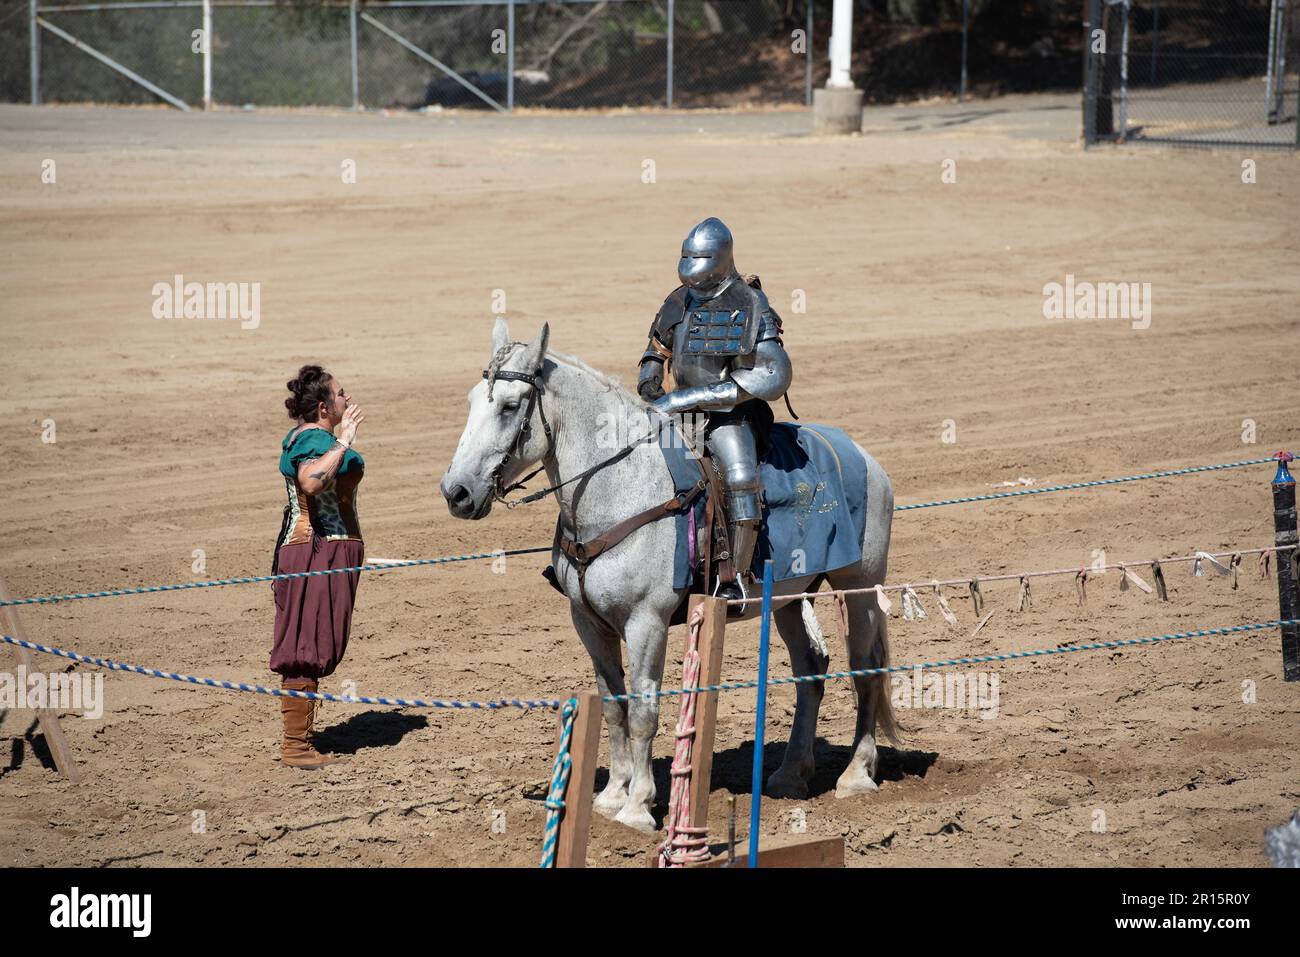 Folsom, CA, September 24, 2022. Unidentified male at the Folsom Renaissance Faire dressed as a knight ridding a white horse Stock Photo